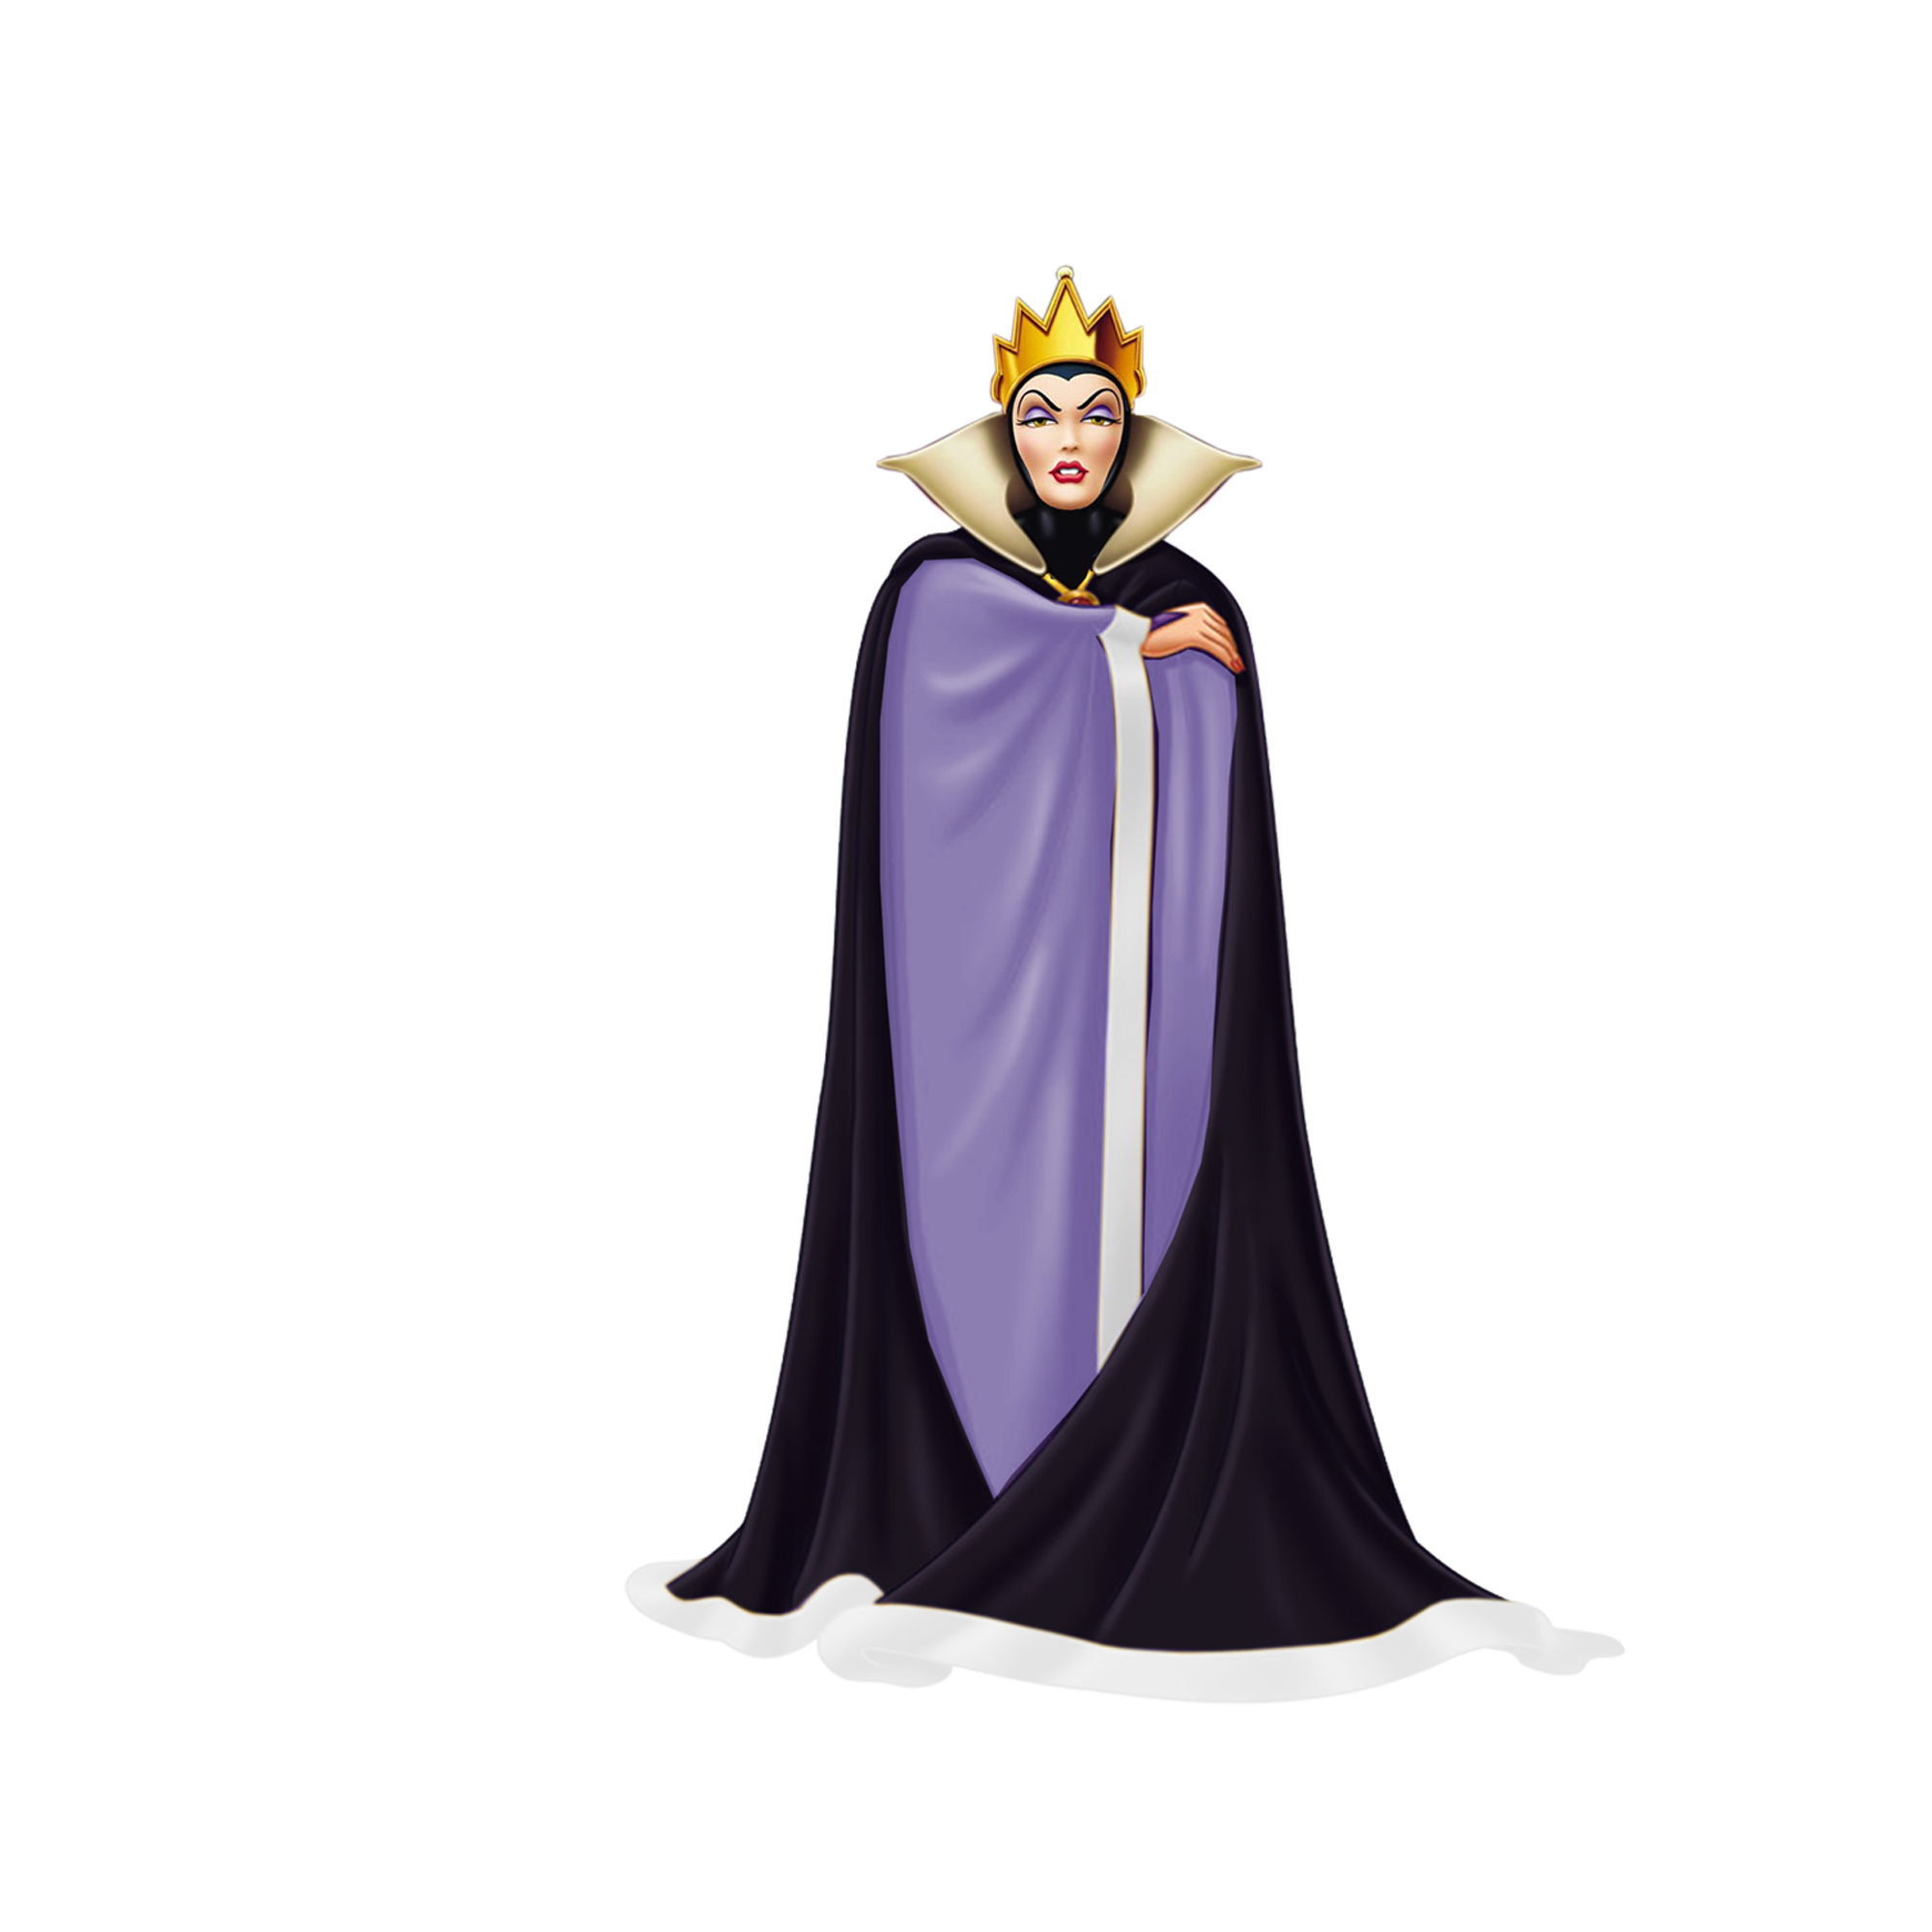 Clip Arts Related To : cartoon snow white evil queen. 